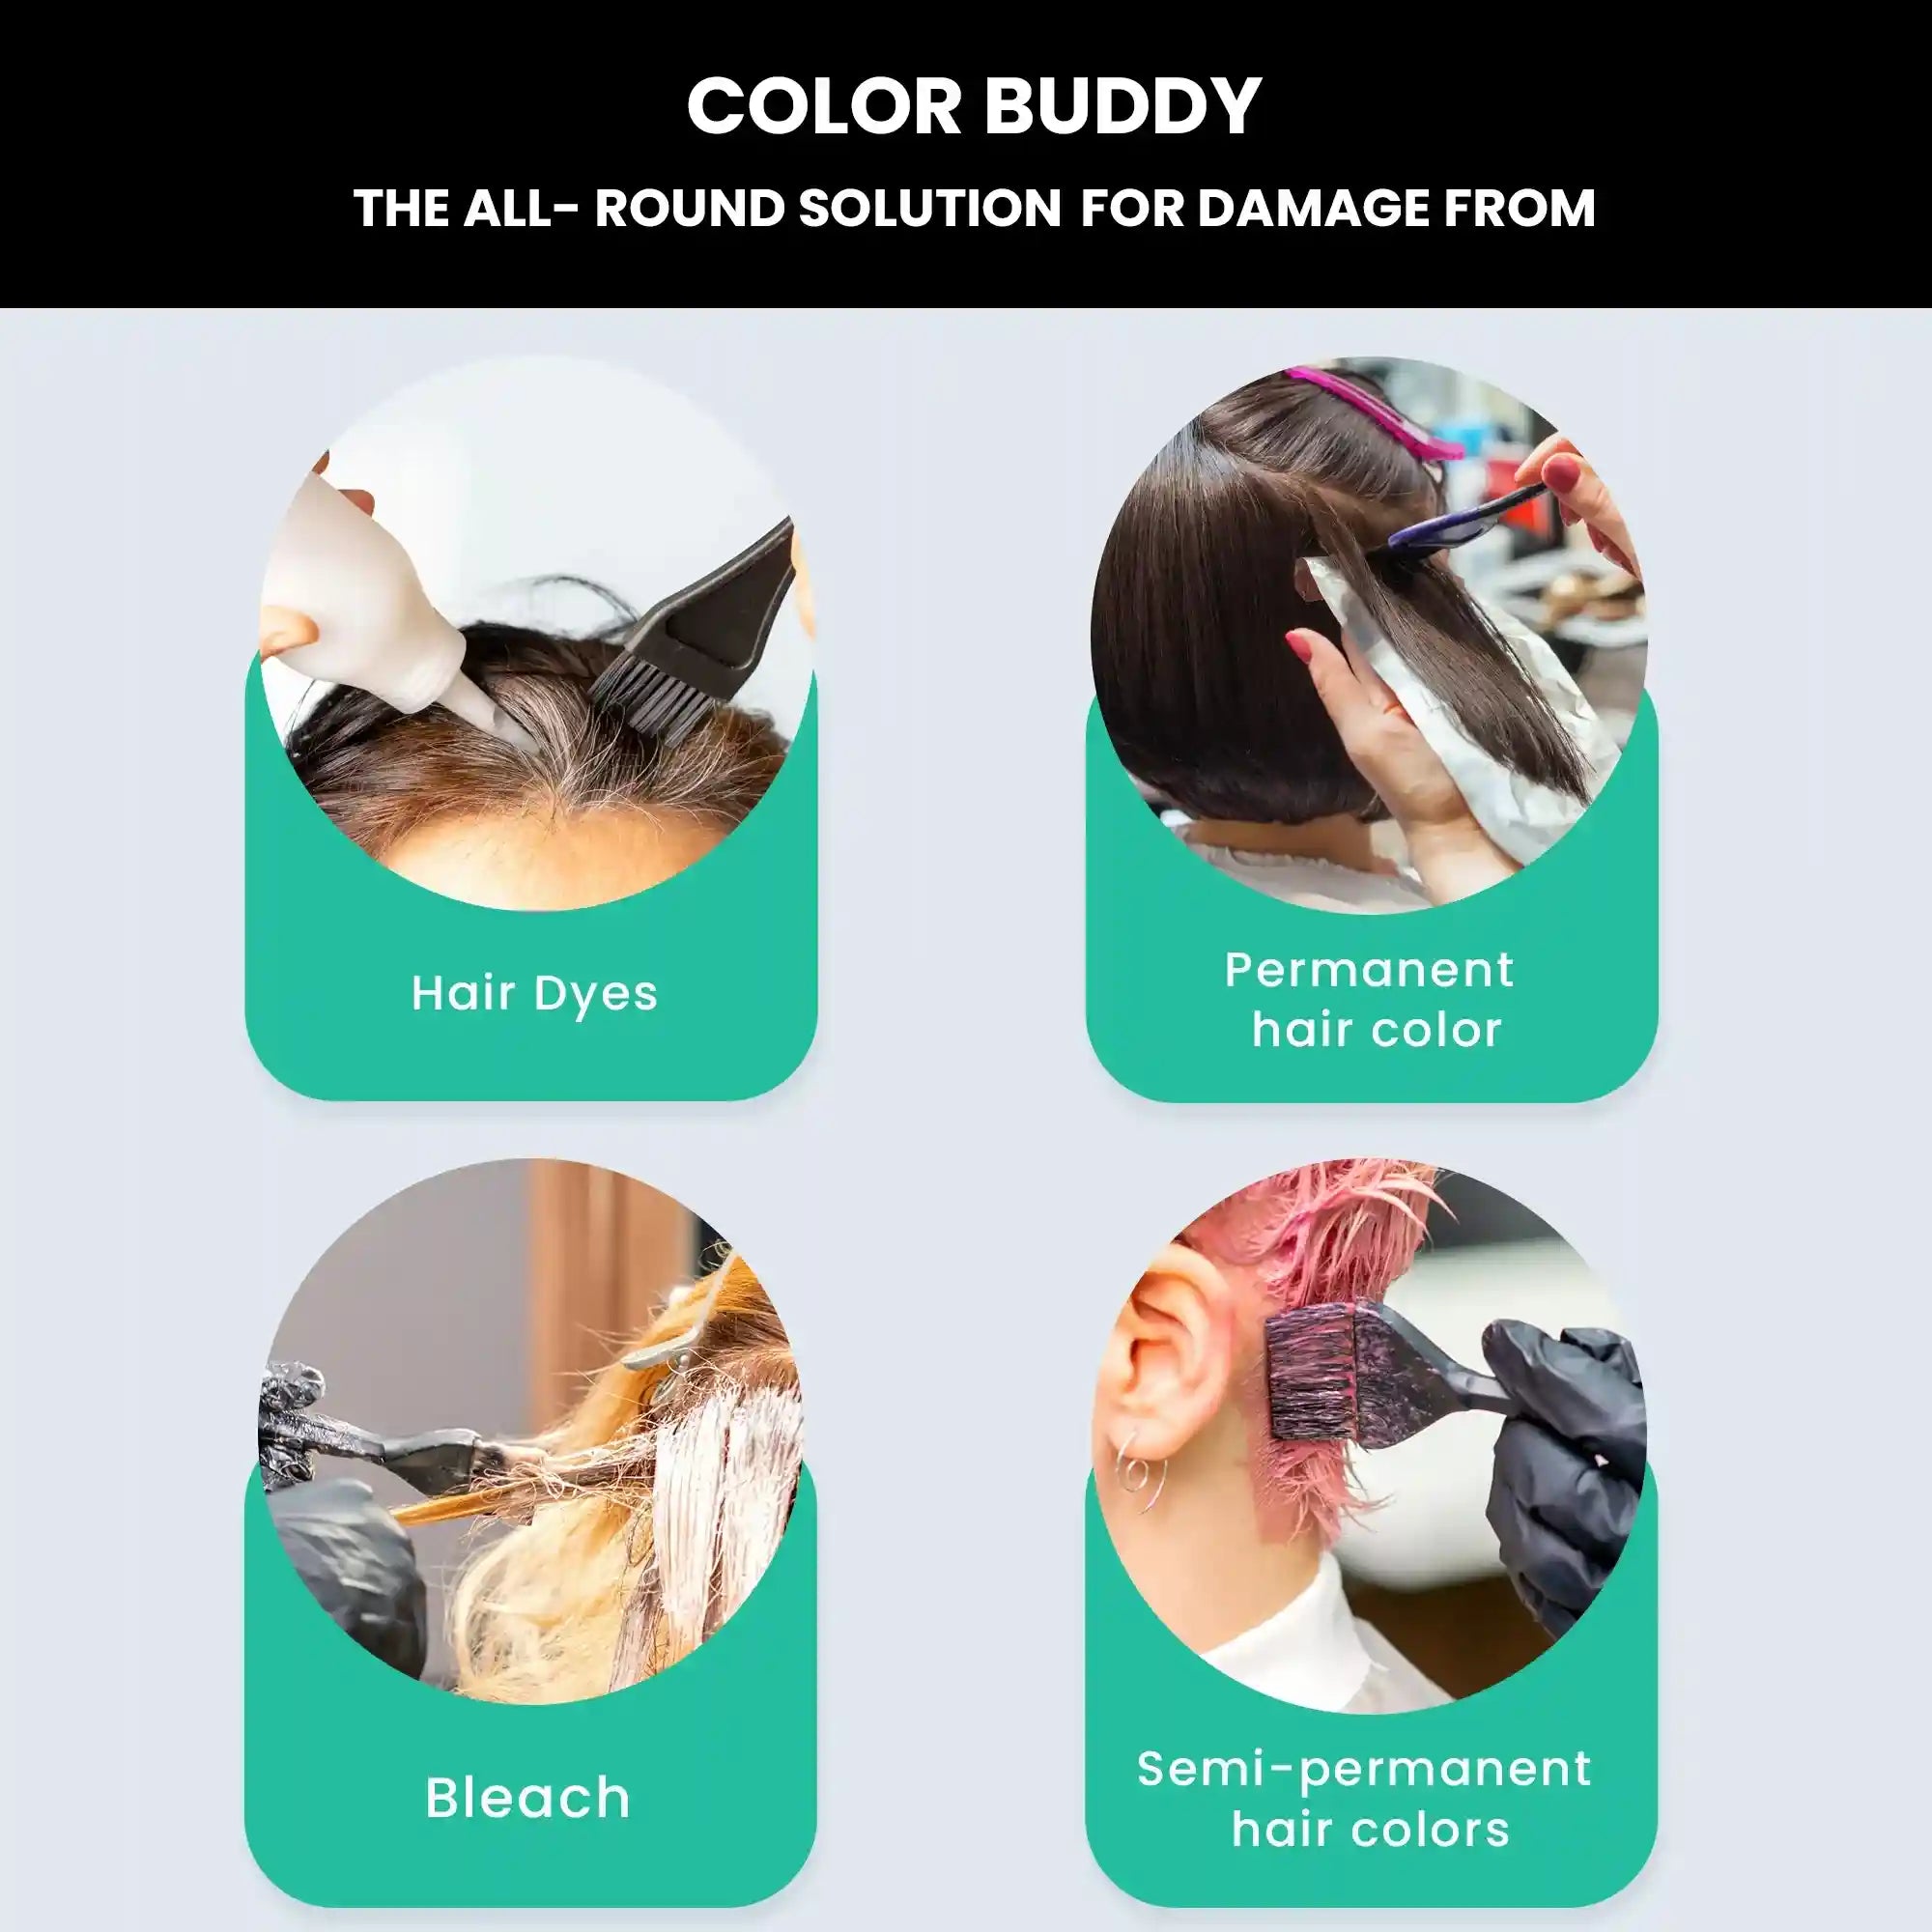 color buddy reverses damage caused by hair dyes, colors & bleach